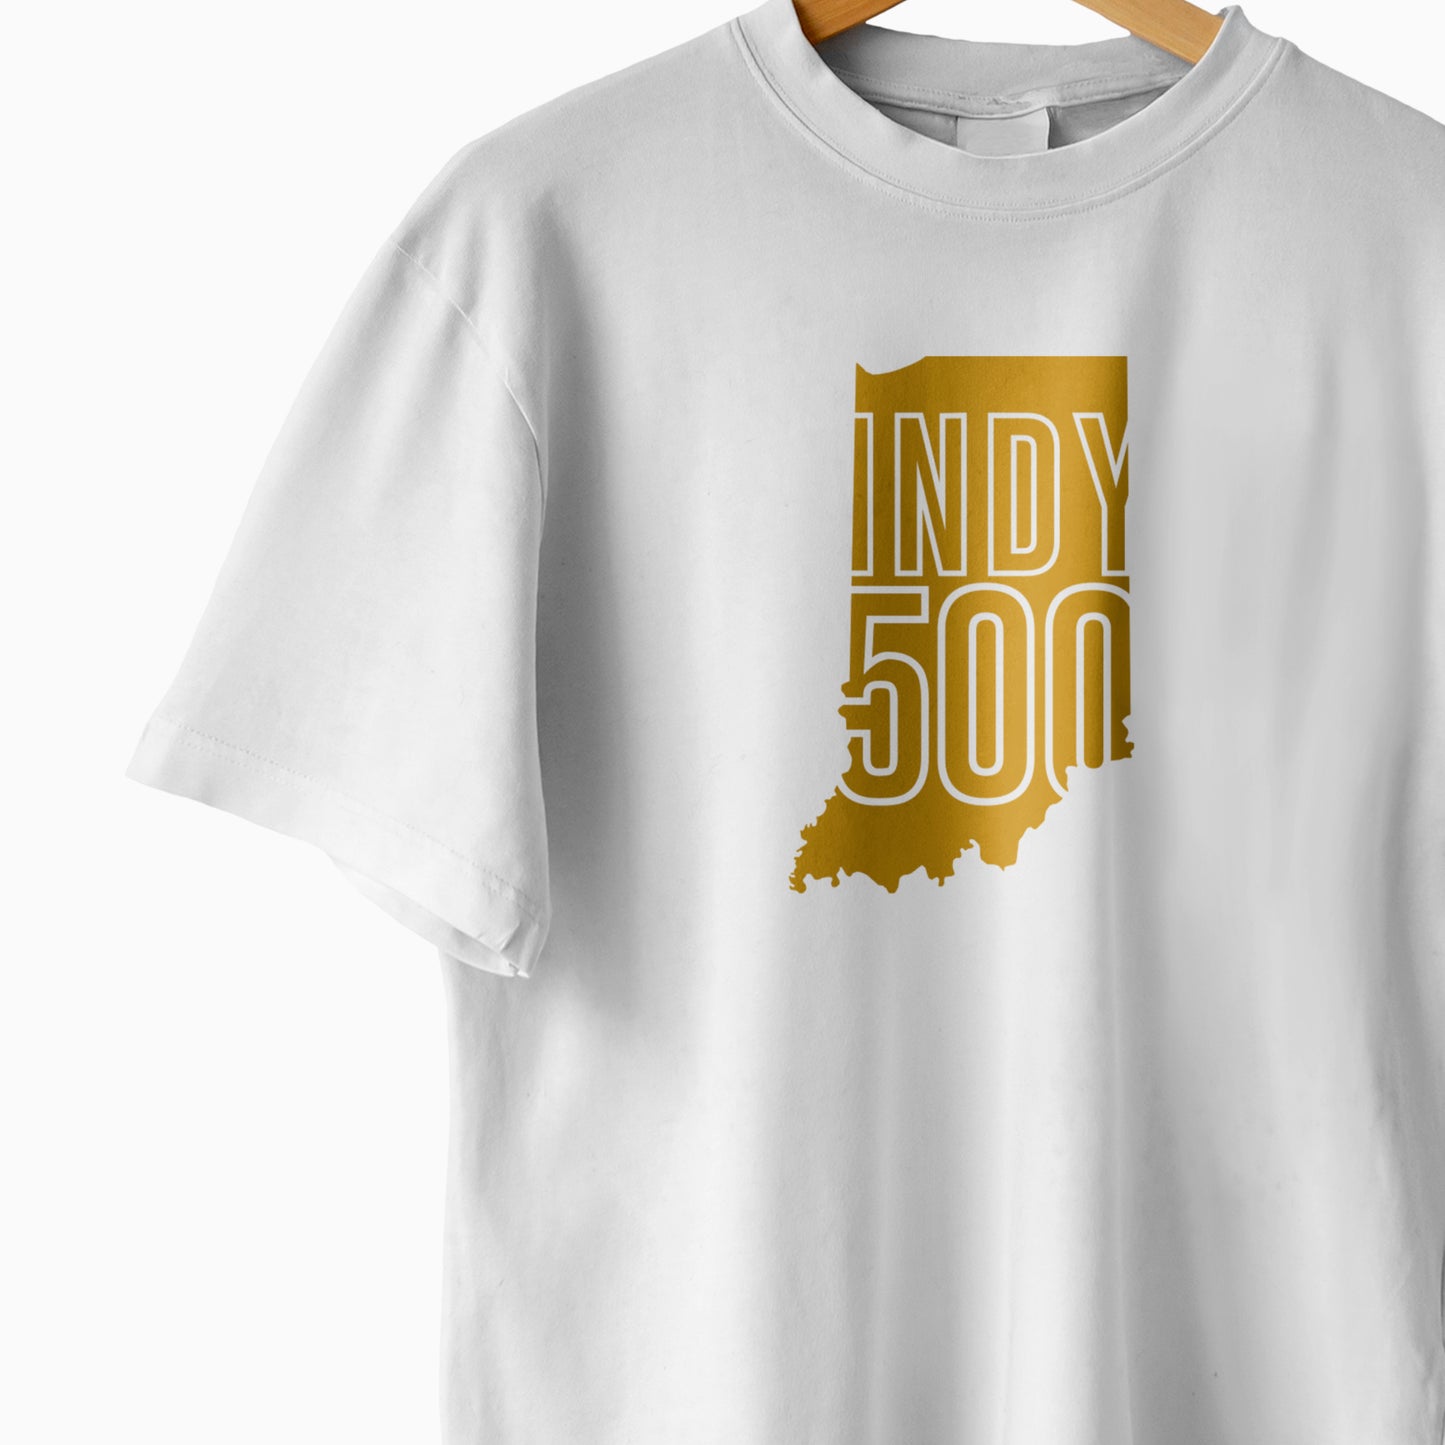 Indy500 White T-shirt